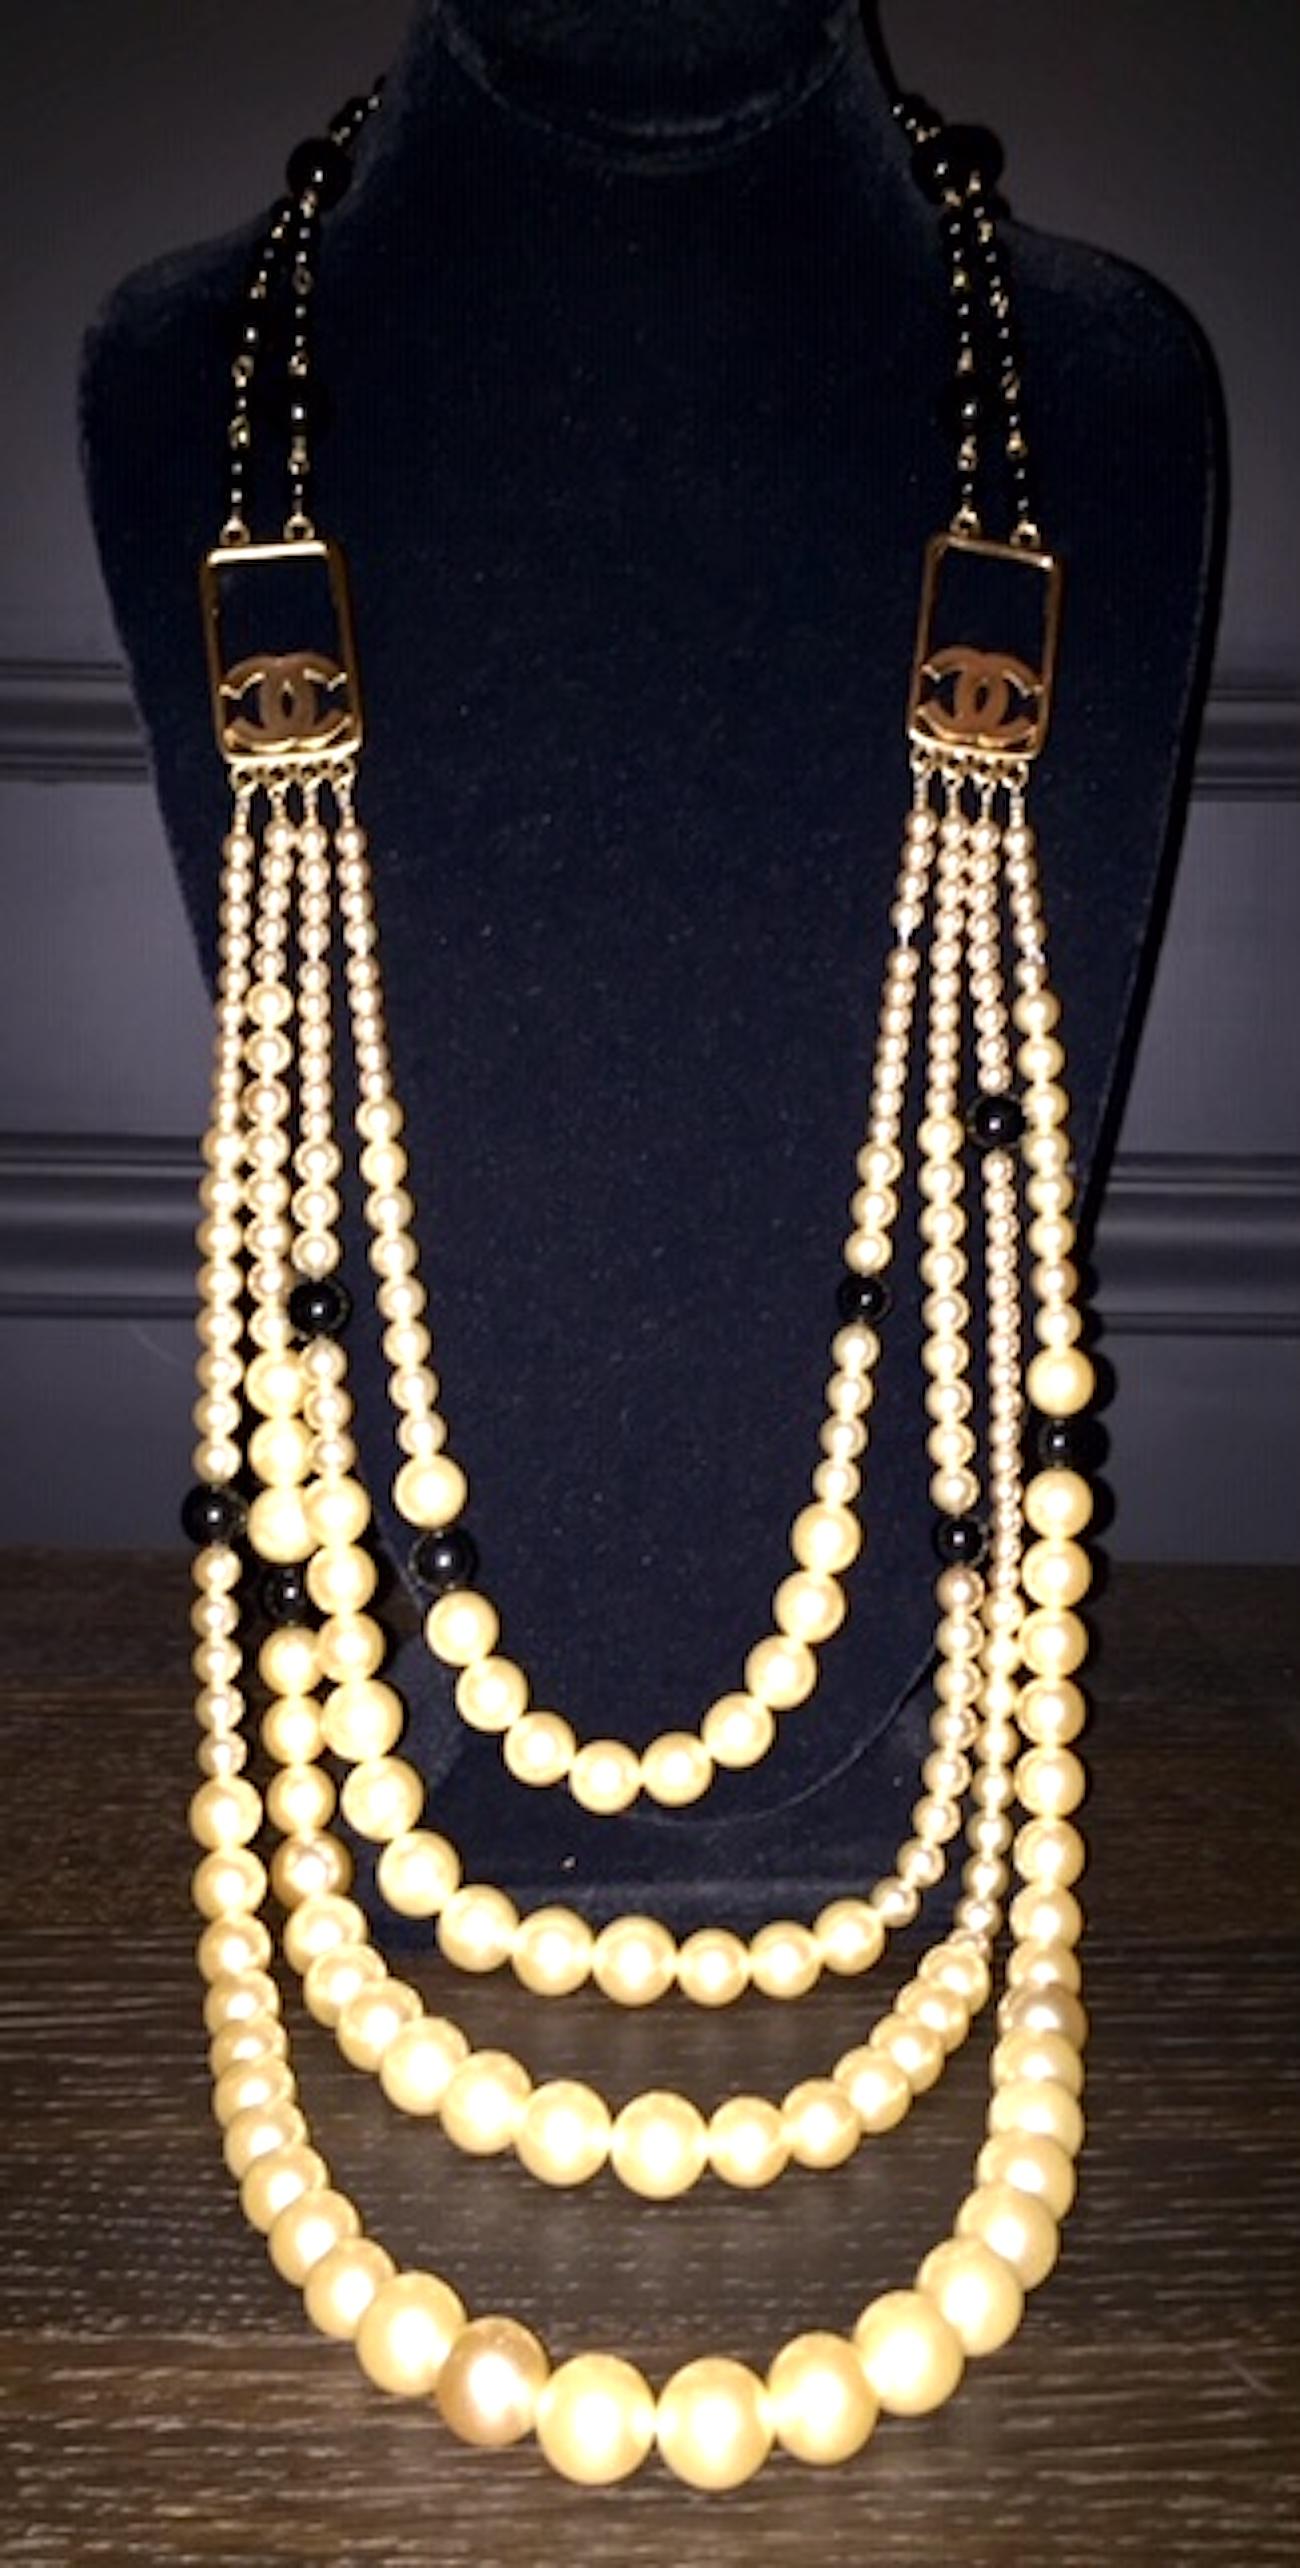 Amazing and dramatic Chanel faux pearl and black bead four strand necklace from the Spring 2003 collection. The back of the necklace consists of two strands of large and small black glass beads. They join to front four strands of graduated pearls by